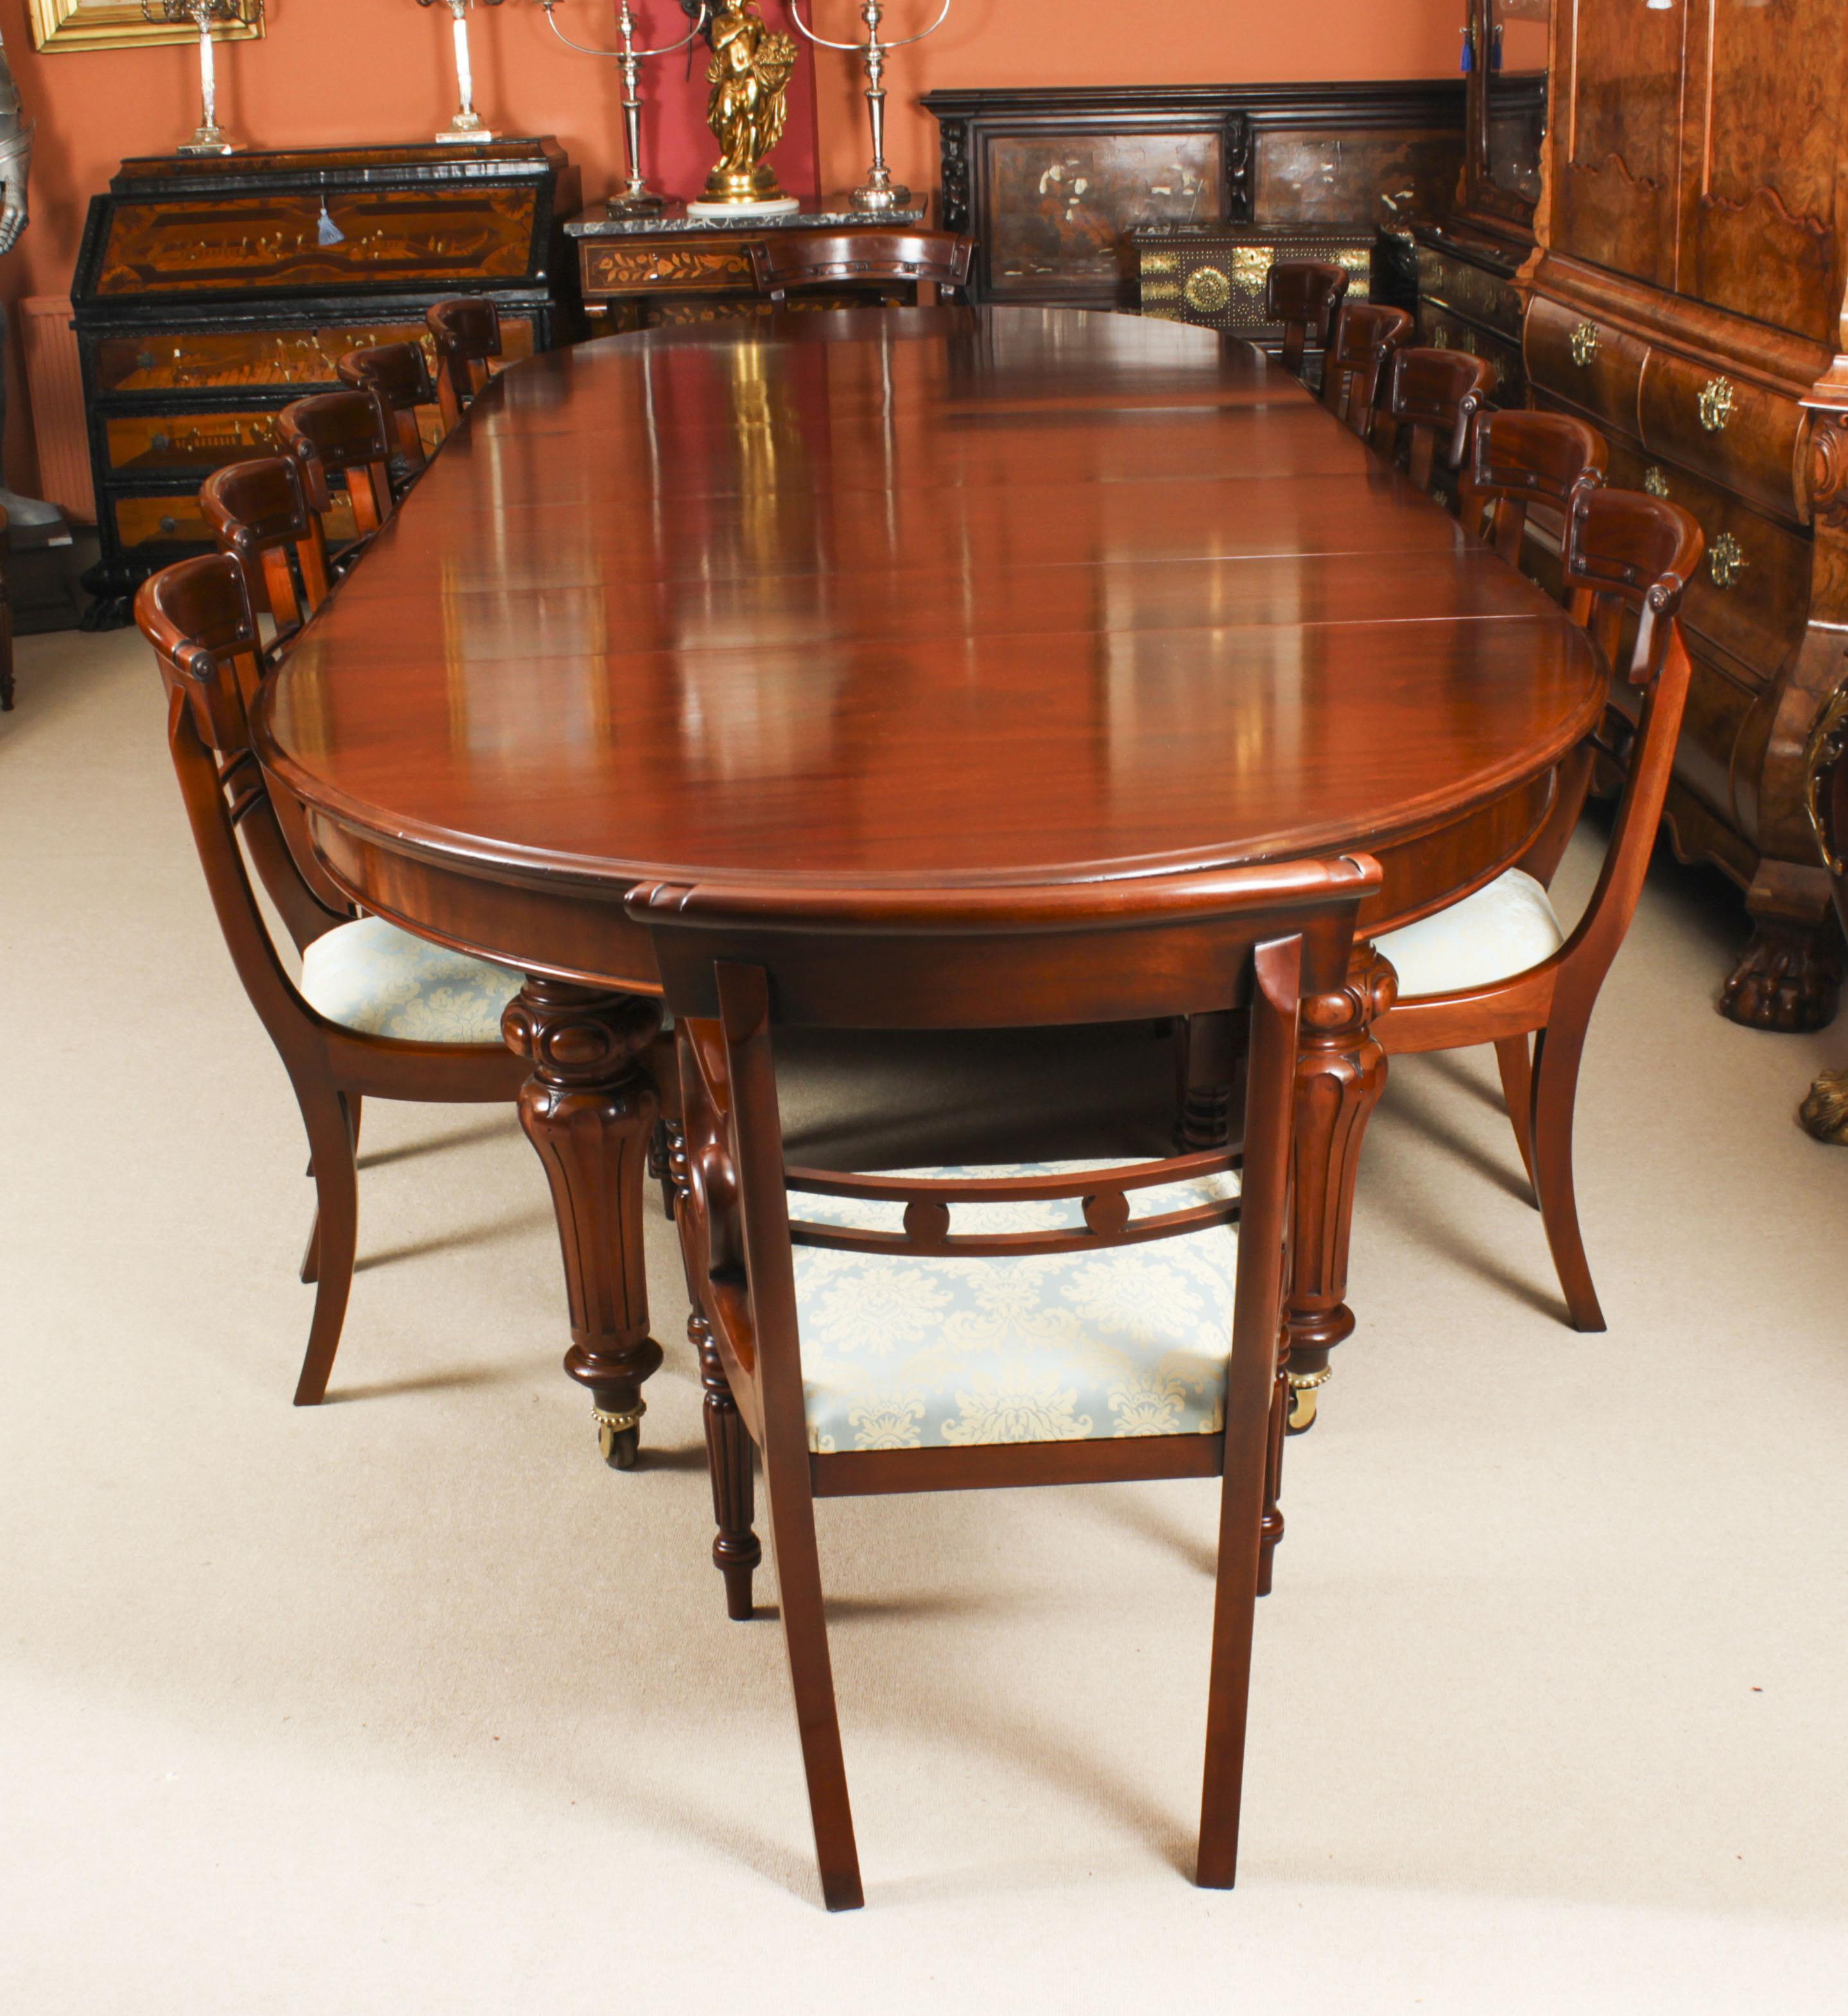 This is a fabulous large antique William IV oval ended flame mahogany extending dining table, circa 1830 in date. 
 
The table has four original leaves, can comfortably seat twelve and has been hand-crafted from flame mahogany which has a beautiful